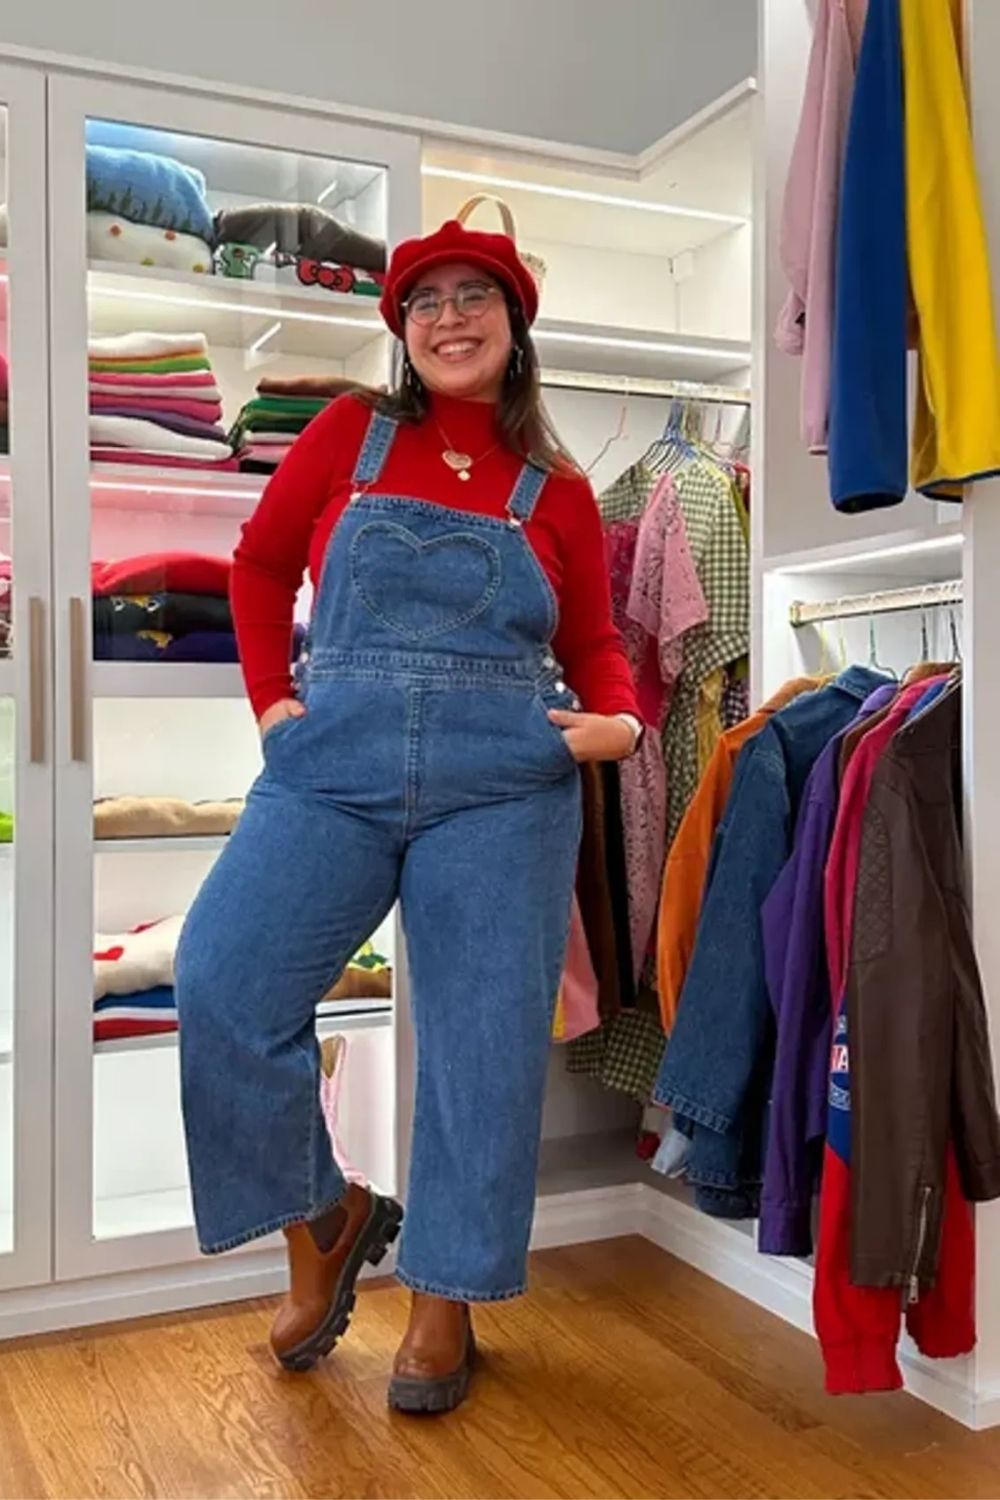 Presenting a playful yet chic take on classic denim overalls, this outfit pairs them with a bright red long-sleeve top, creating a striking color contrast that's eye-catching and trendy. The addition of a red beret and stylish eyeglasses adds a touch of Parisian flair, making the ensemble fashion-forward and cohesive.